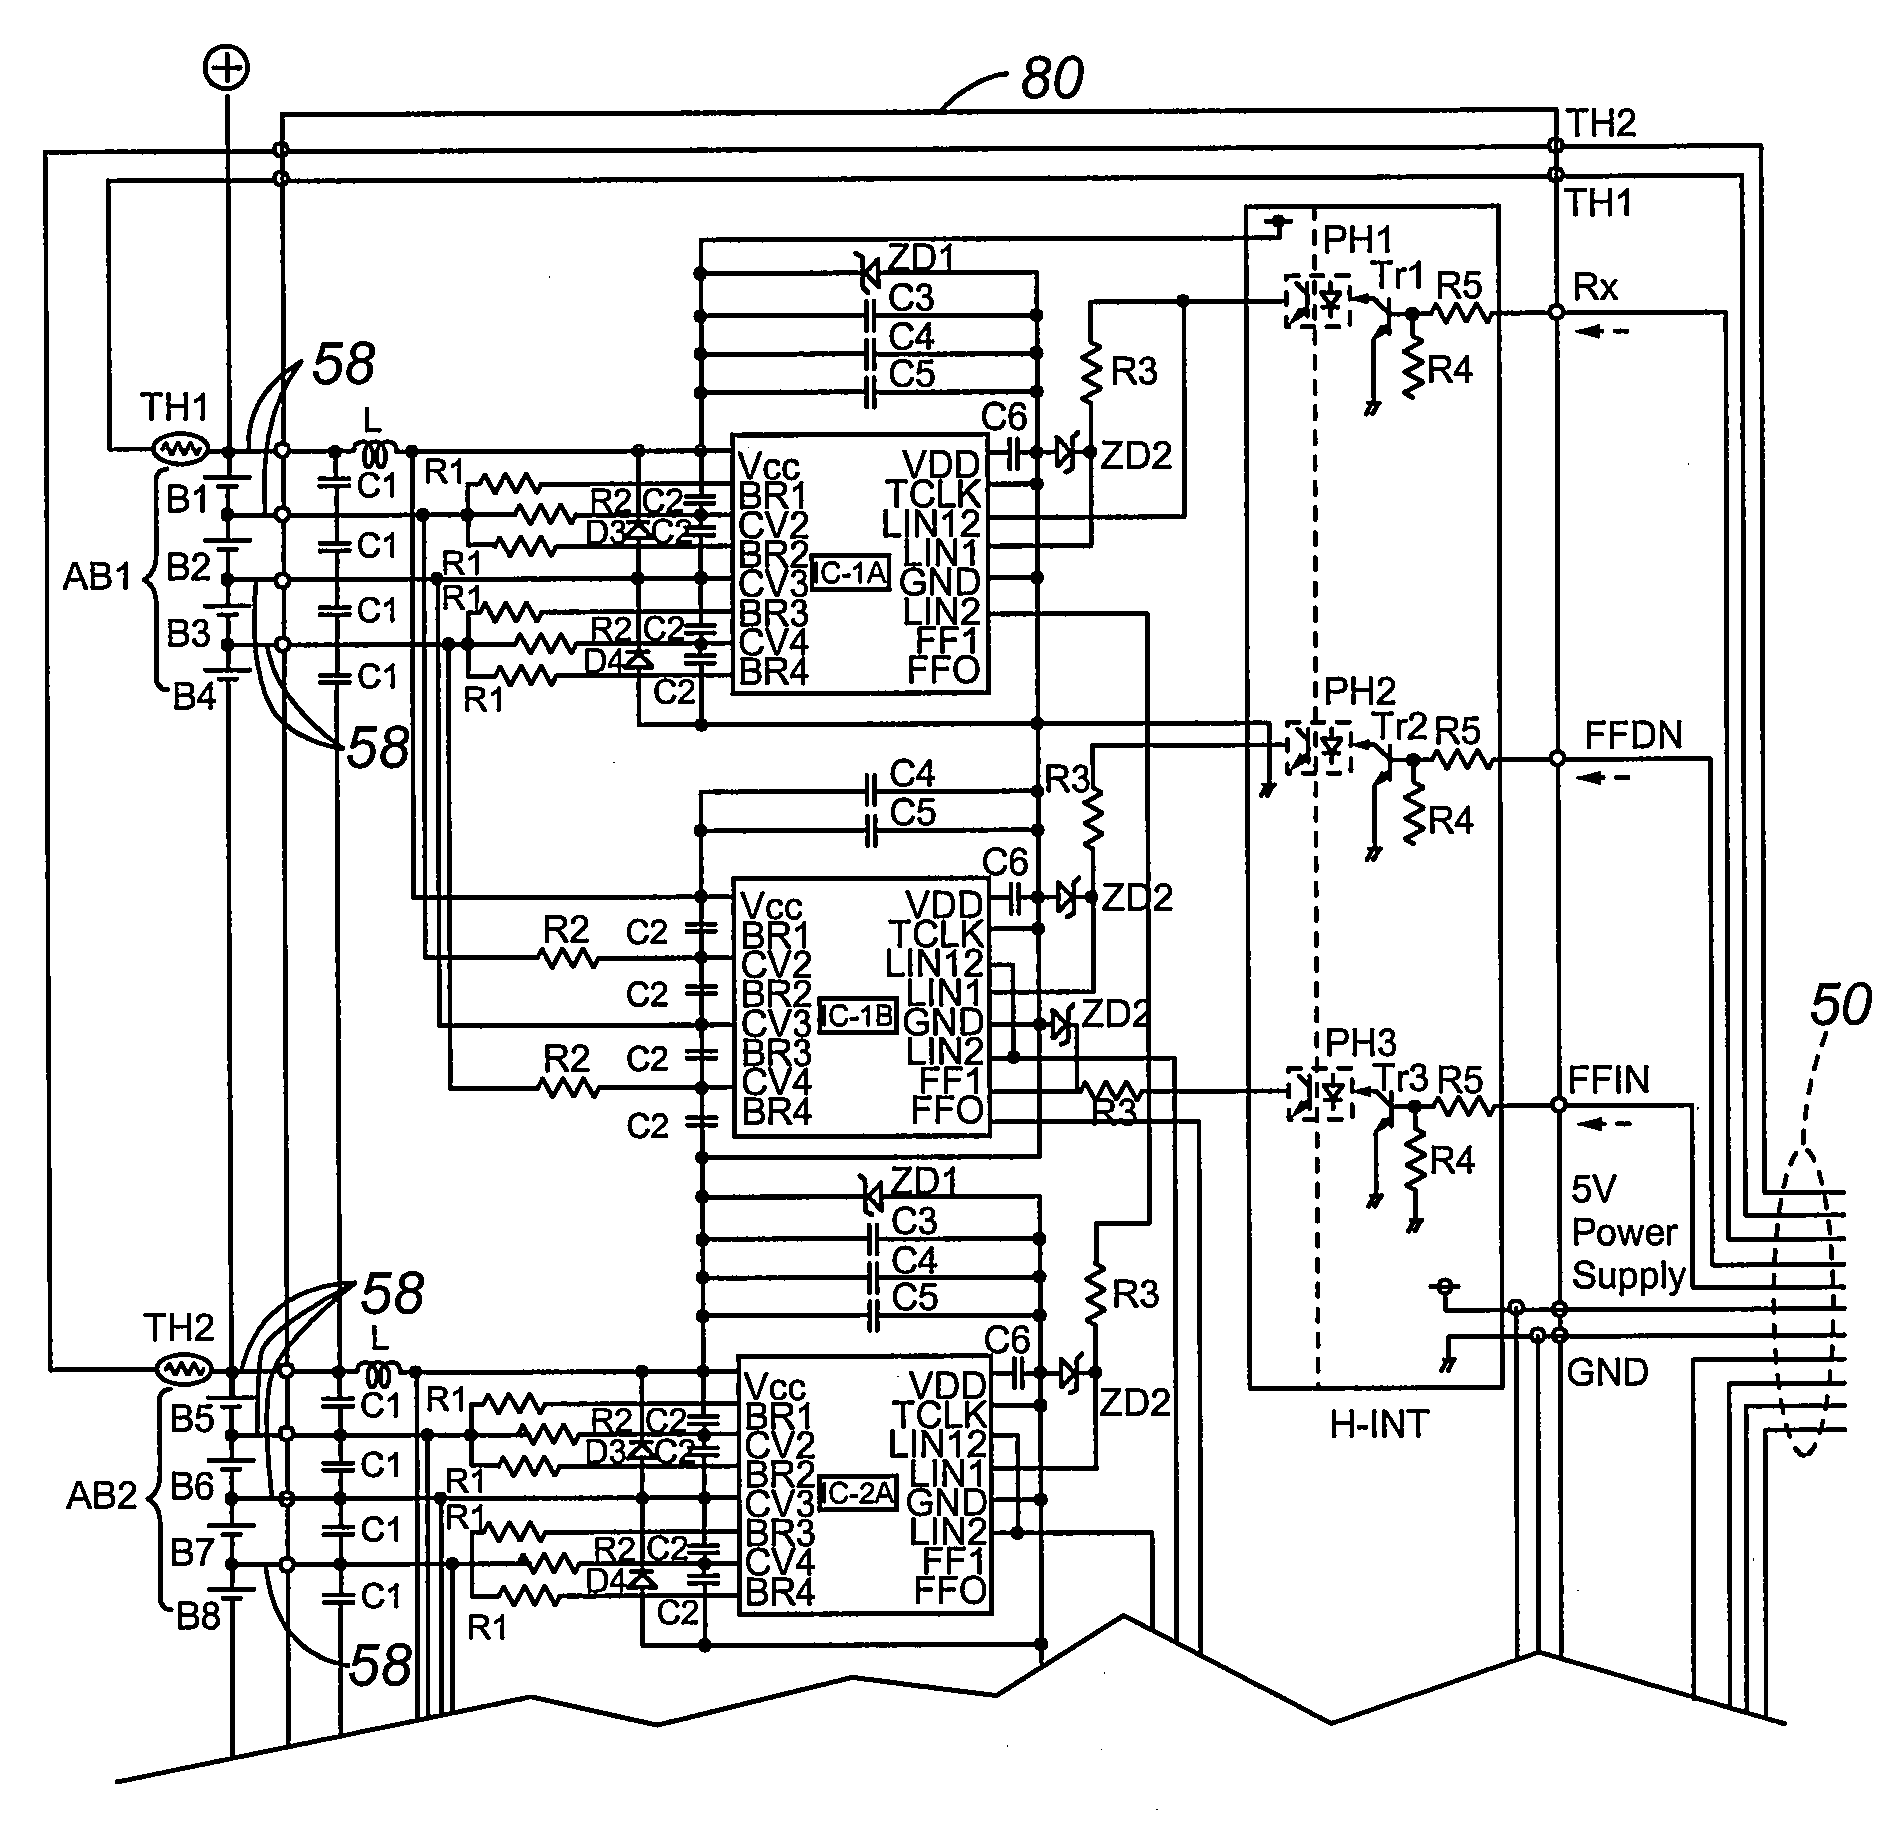 Cell controller, battery module and power supply system